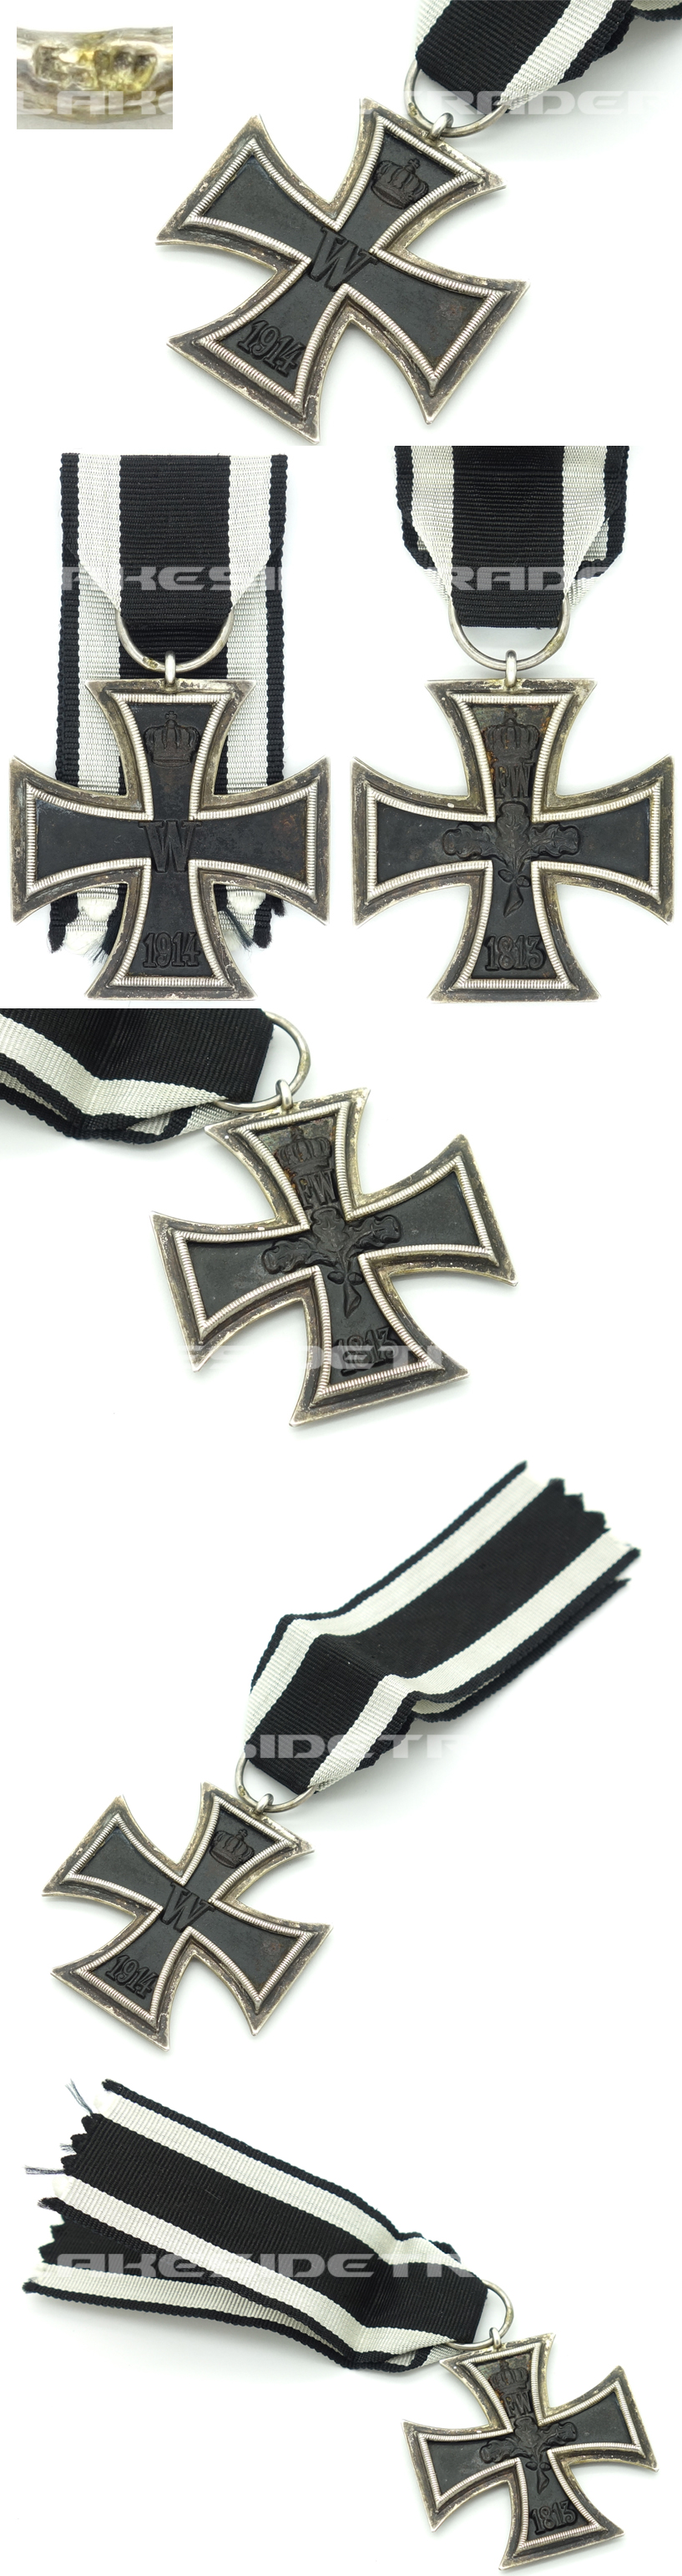 Imperial 2nd Class Iron Cross by EW